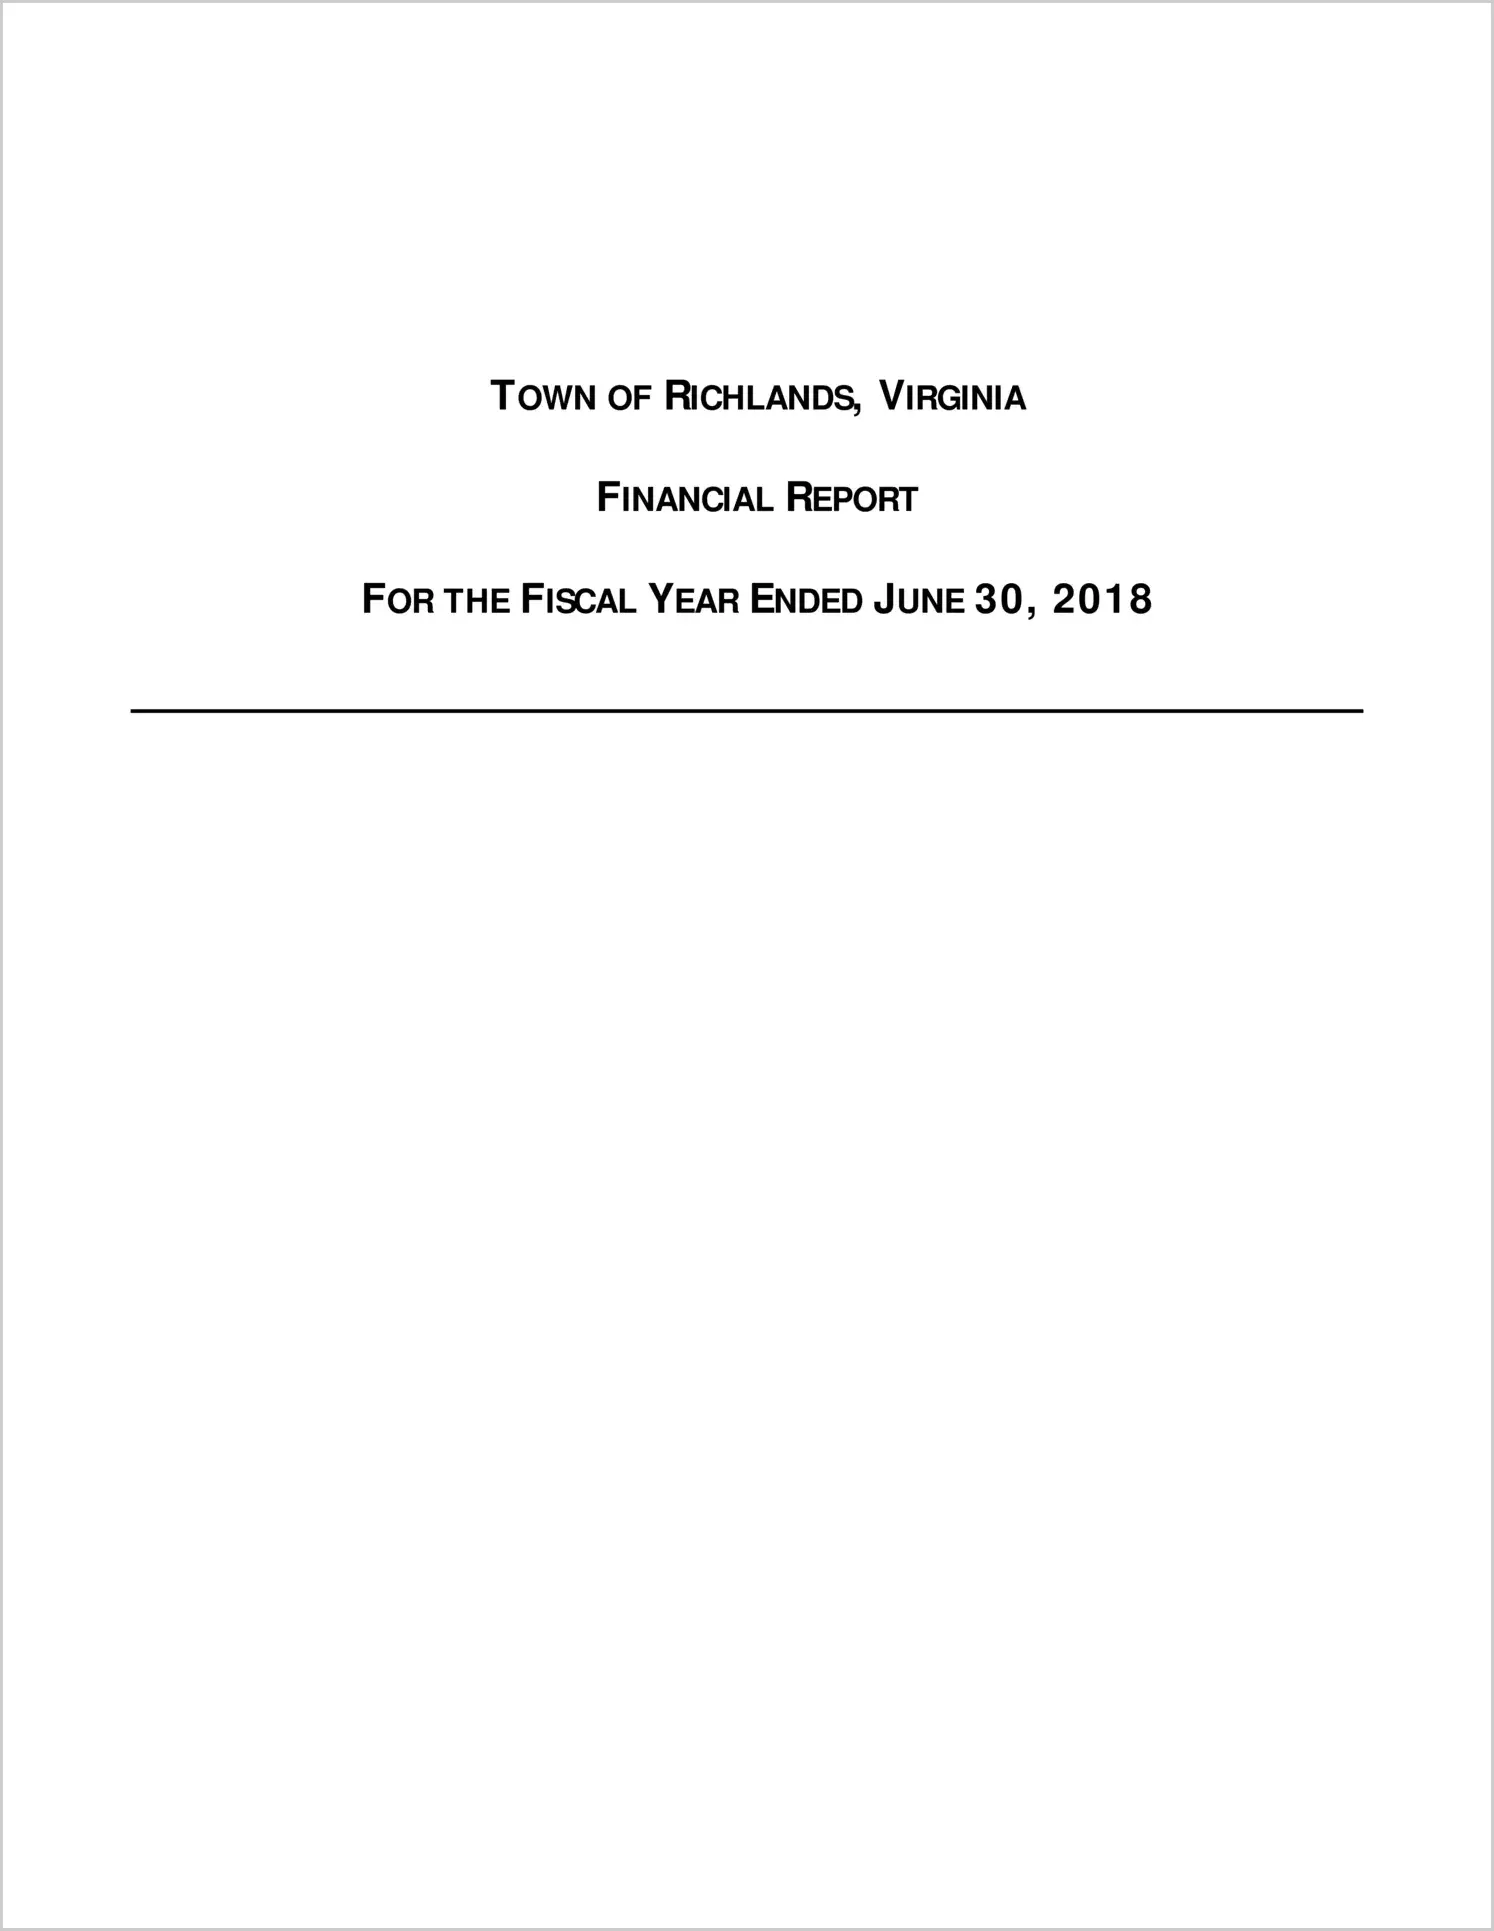 2018 Annual Financial Report for Town of Richlands